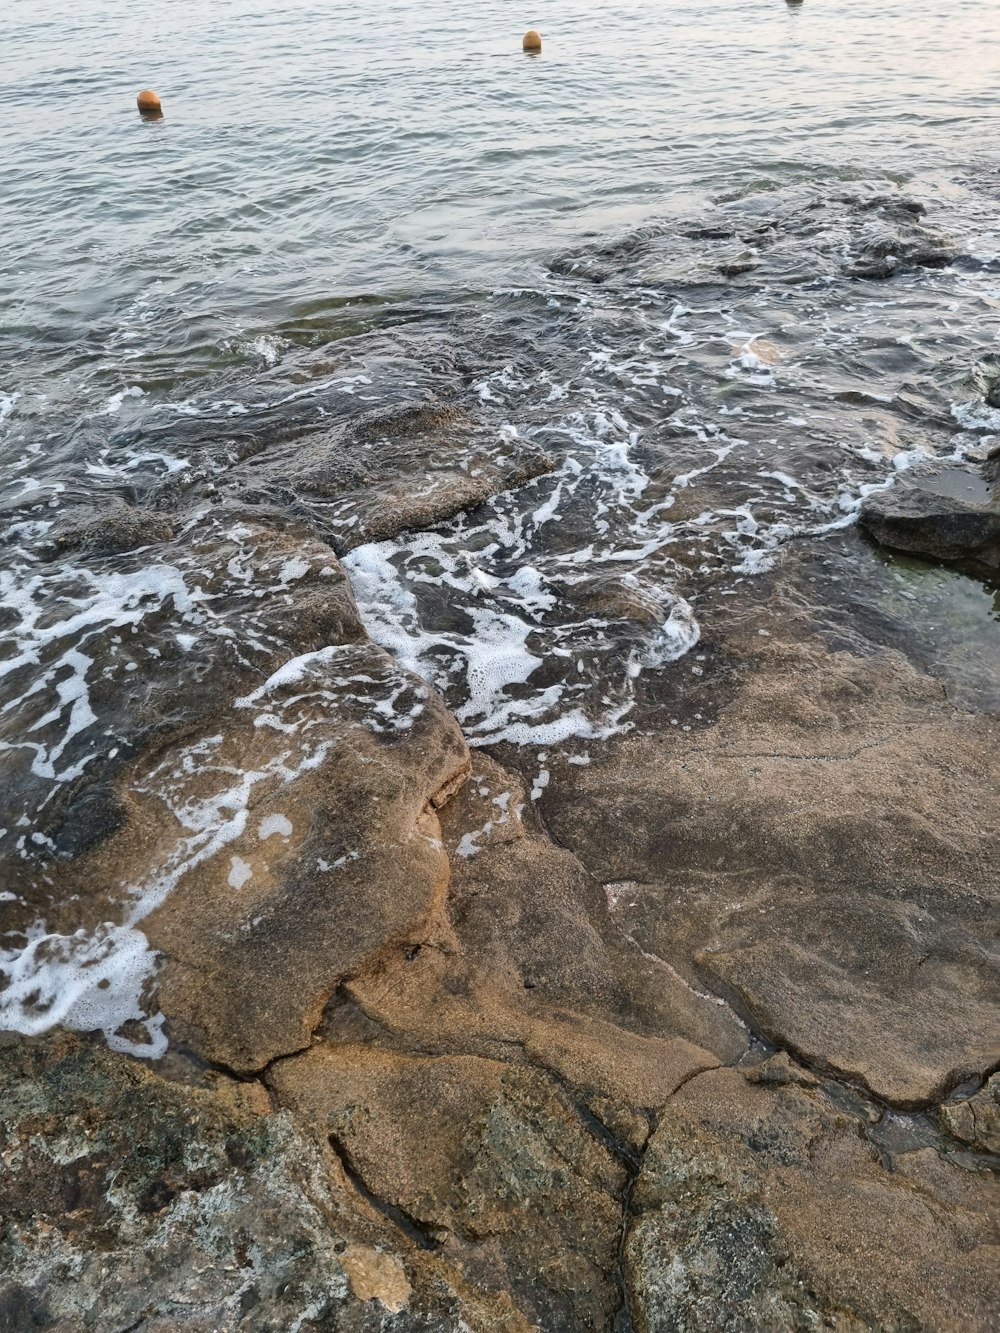 a view of a body of water with rocks in the foreground